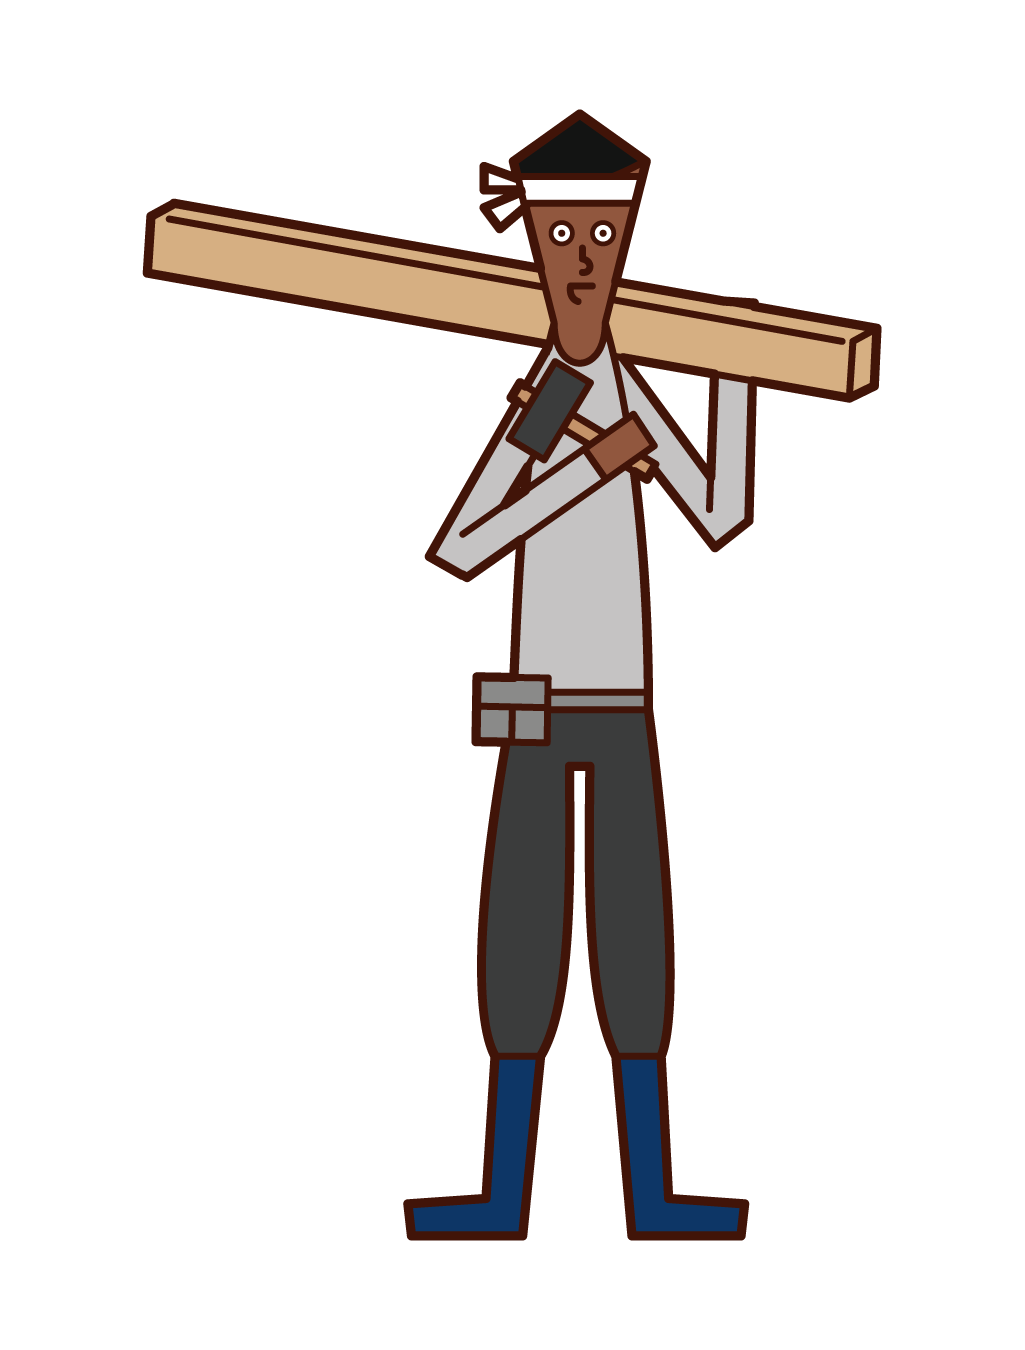 Illustration of a carpenter carrying wood